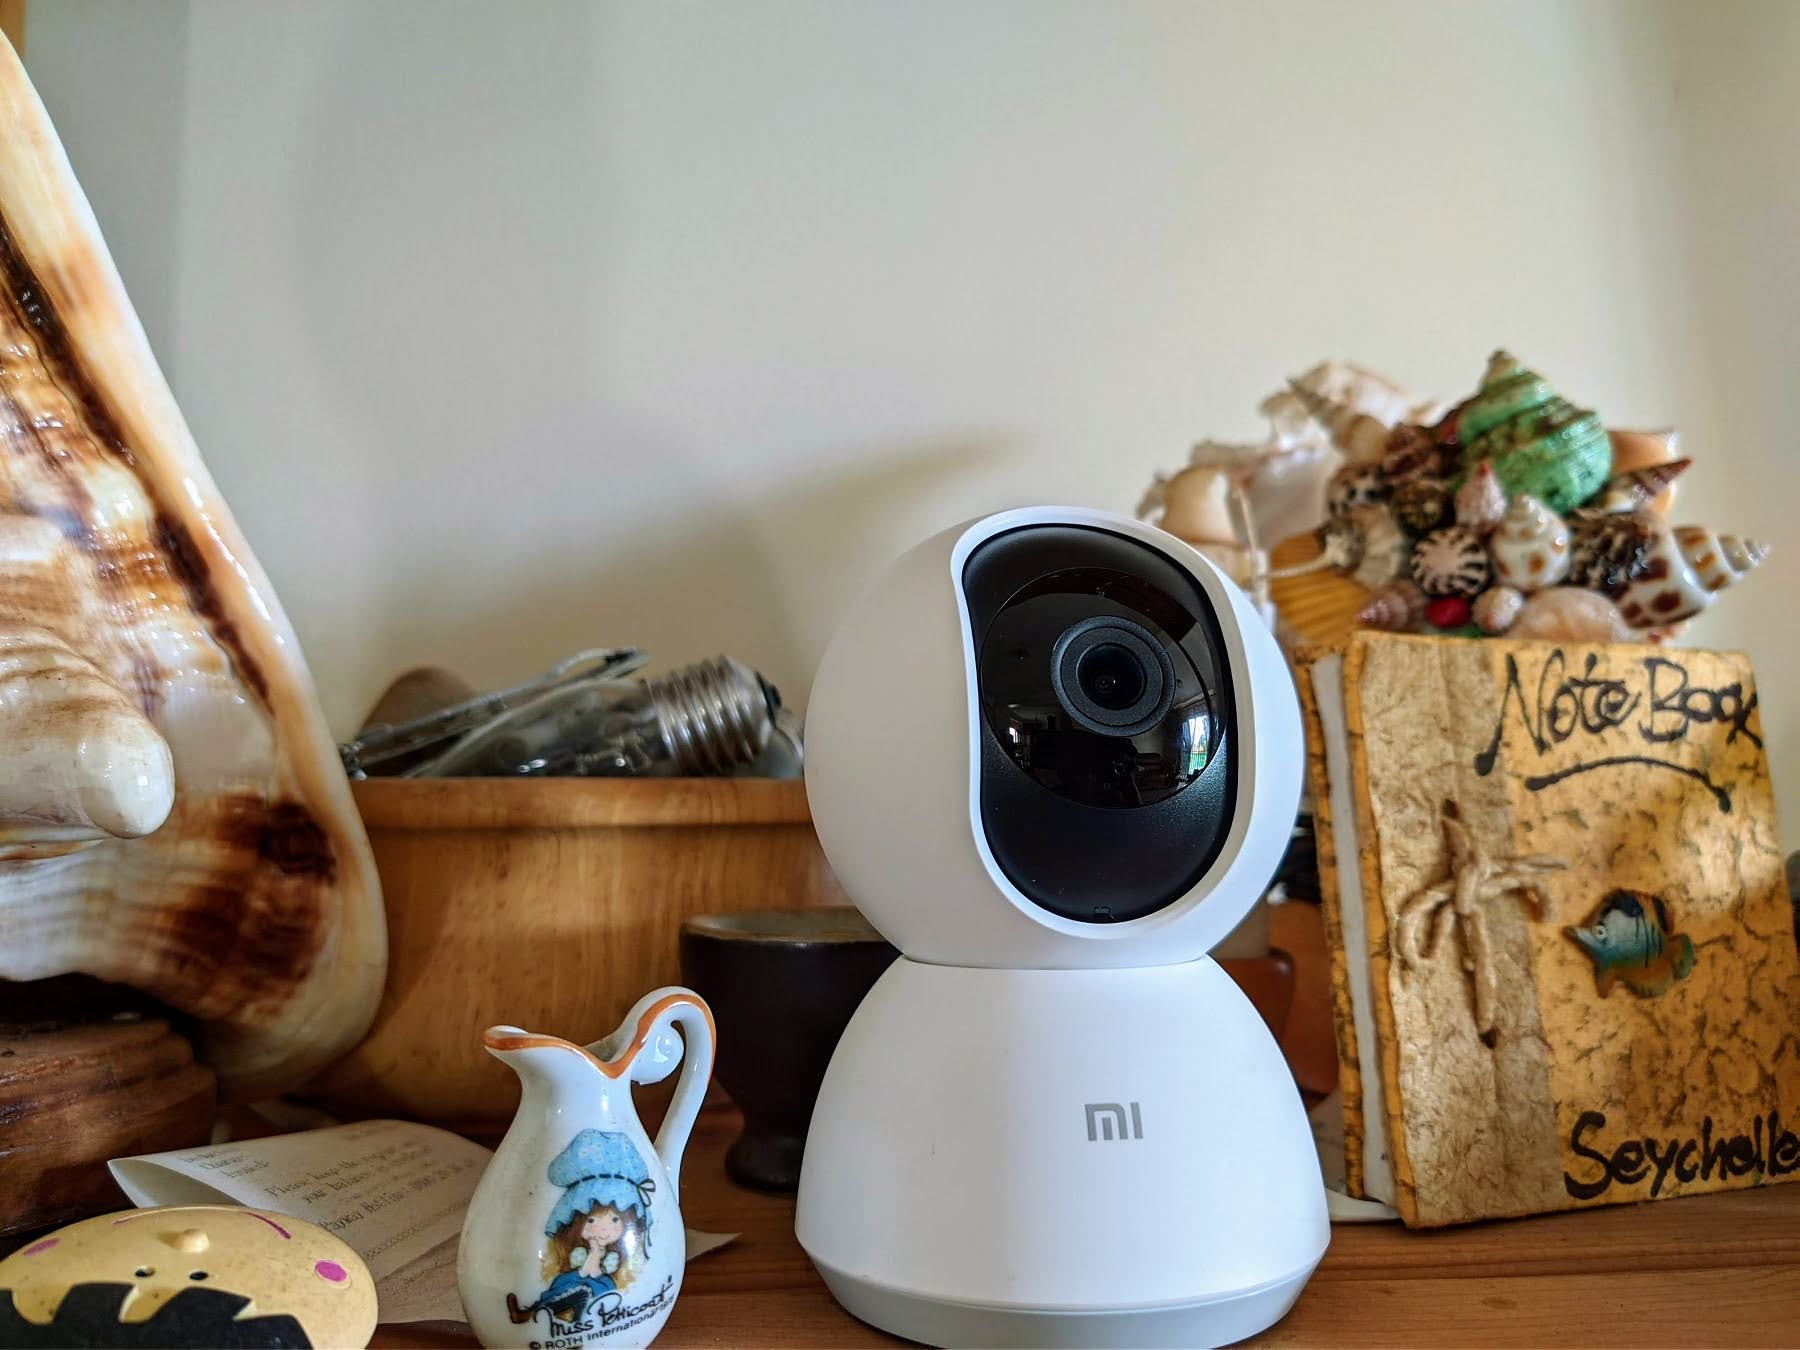 Lach boeren Beurs How to Set up the Xiaomi Mi Home Security Camera 360 1080P - Dignited